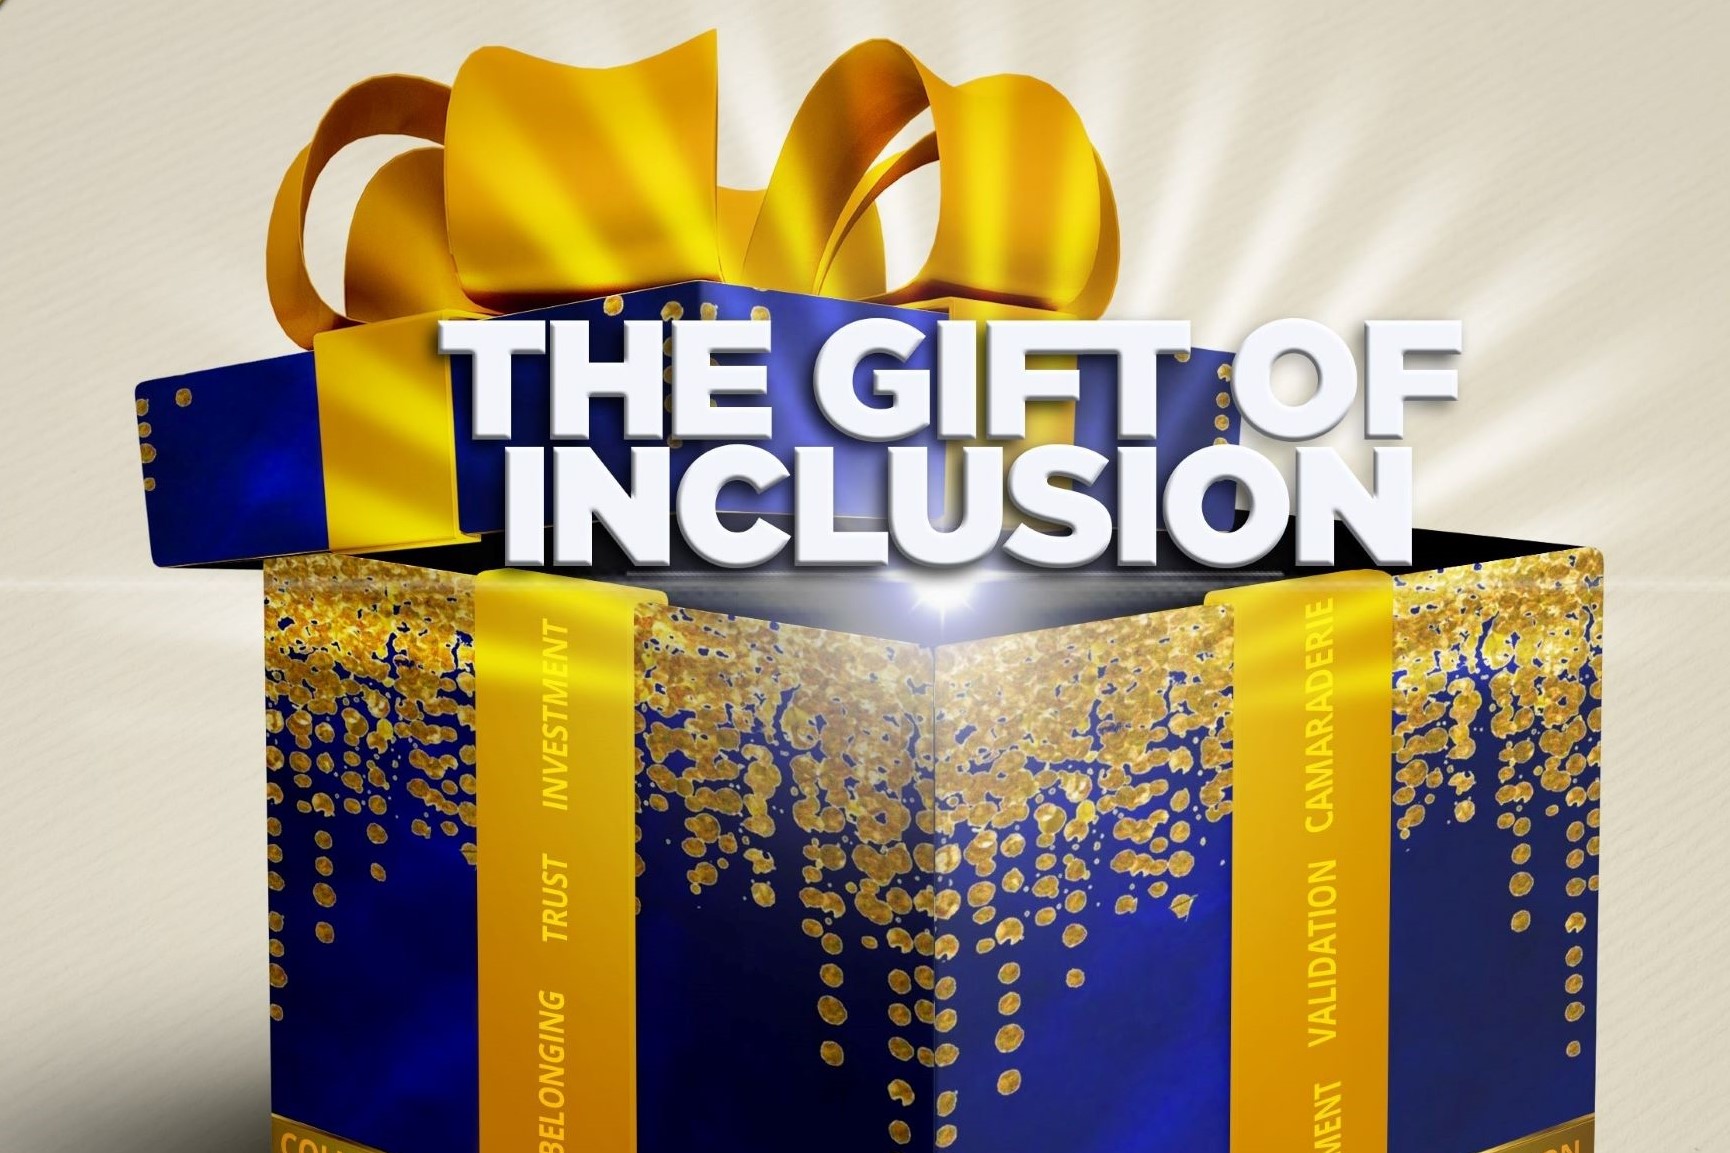 The Gift of Inclusion